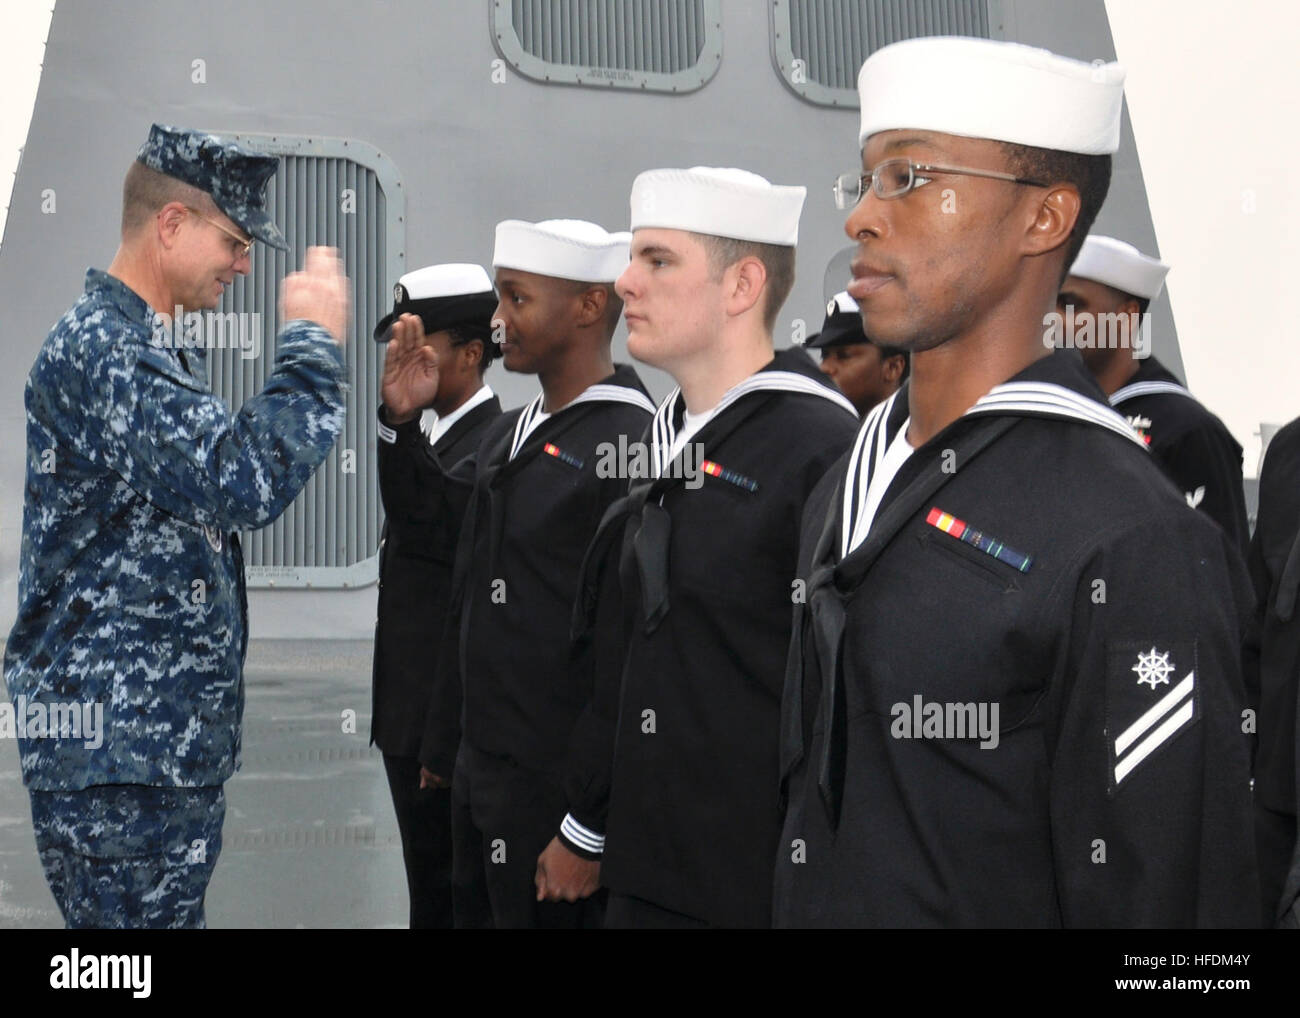 PASCAGOULA, Miss. (Feb. 6, 2013)  Quartermaster Seaman Apprentice Rashaun Plowden renders a salute to Cmdr. Darren Nelson, commanding officer of the amphibious transport dock ship Pre-Commissioning Unit (PCU) Arlington (LPD 24) during a uniform inspection. Arlington is named for Arlington County, Va., home of the Pentagon, in honor of the 184 people killed at the Pentagon during the Sept. 11, 2001 terrorist attacks. (U.S. Navy photo by Mass Communication Specialist 1st Class Eric Brown/Released) 130206-N-VJ151-001 Join the conversation http://www.facebook.com/USNavy http://www.twitter.com/USNa Stock Photo